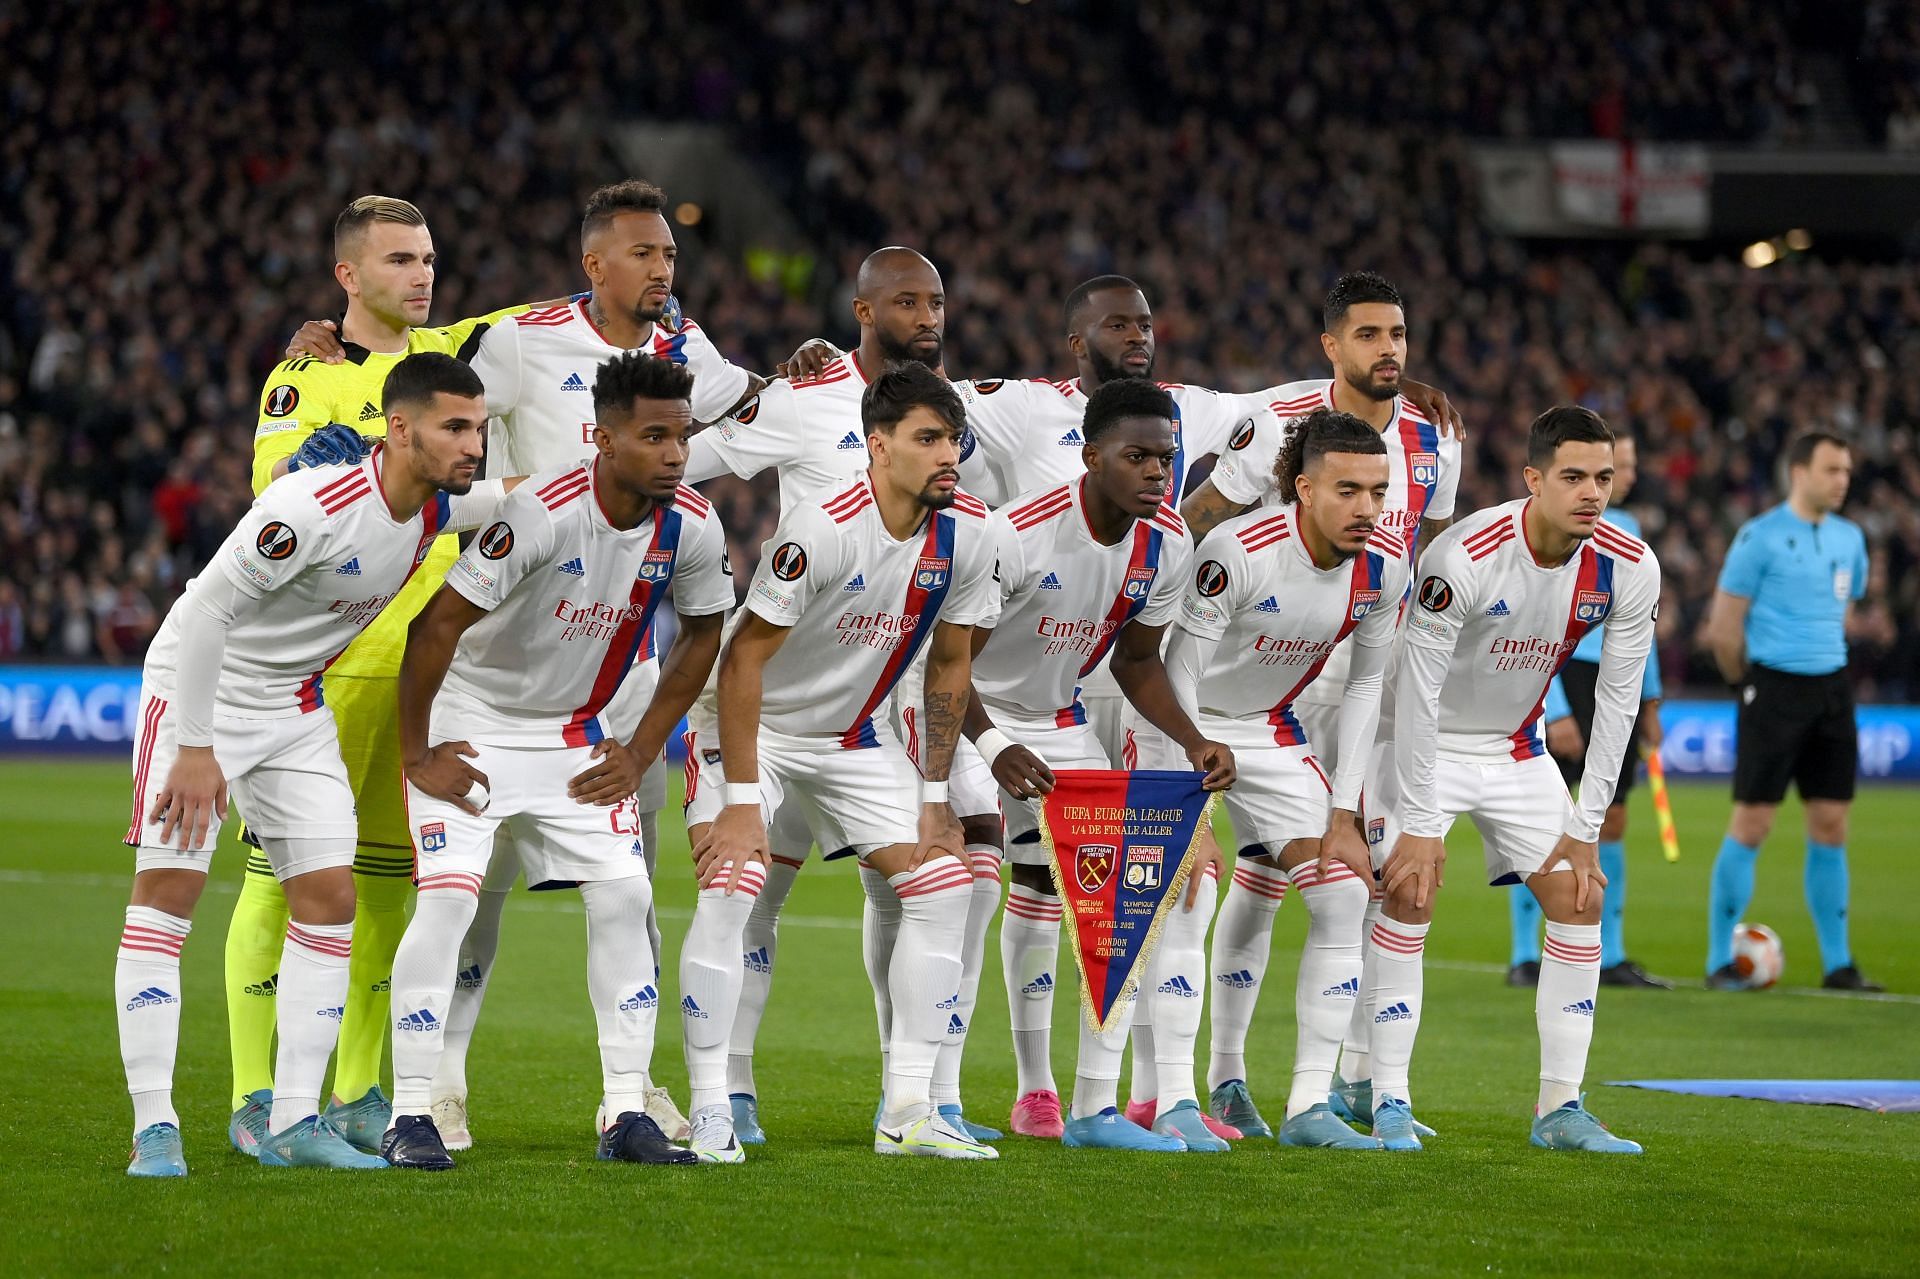 Olympique Lyon vs AC Ajaccio Prediction and Betting Tips | 5th August 2022